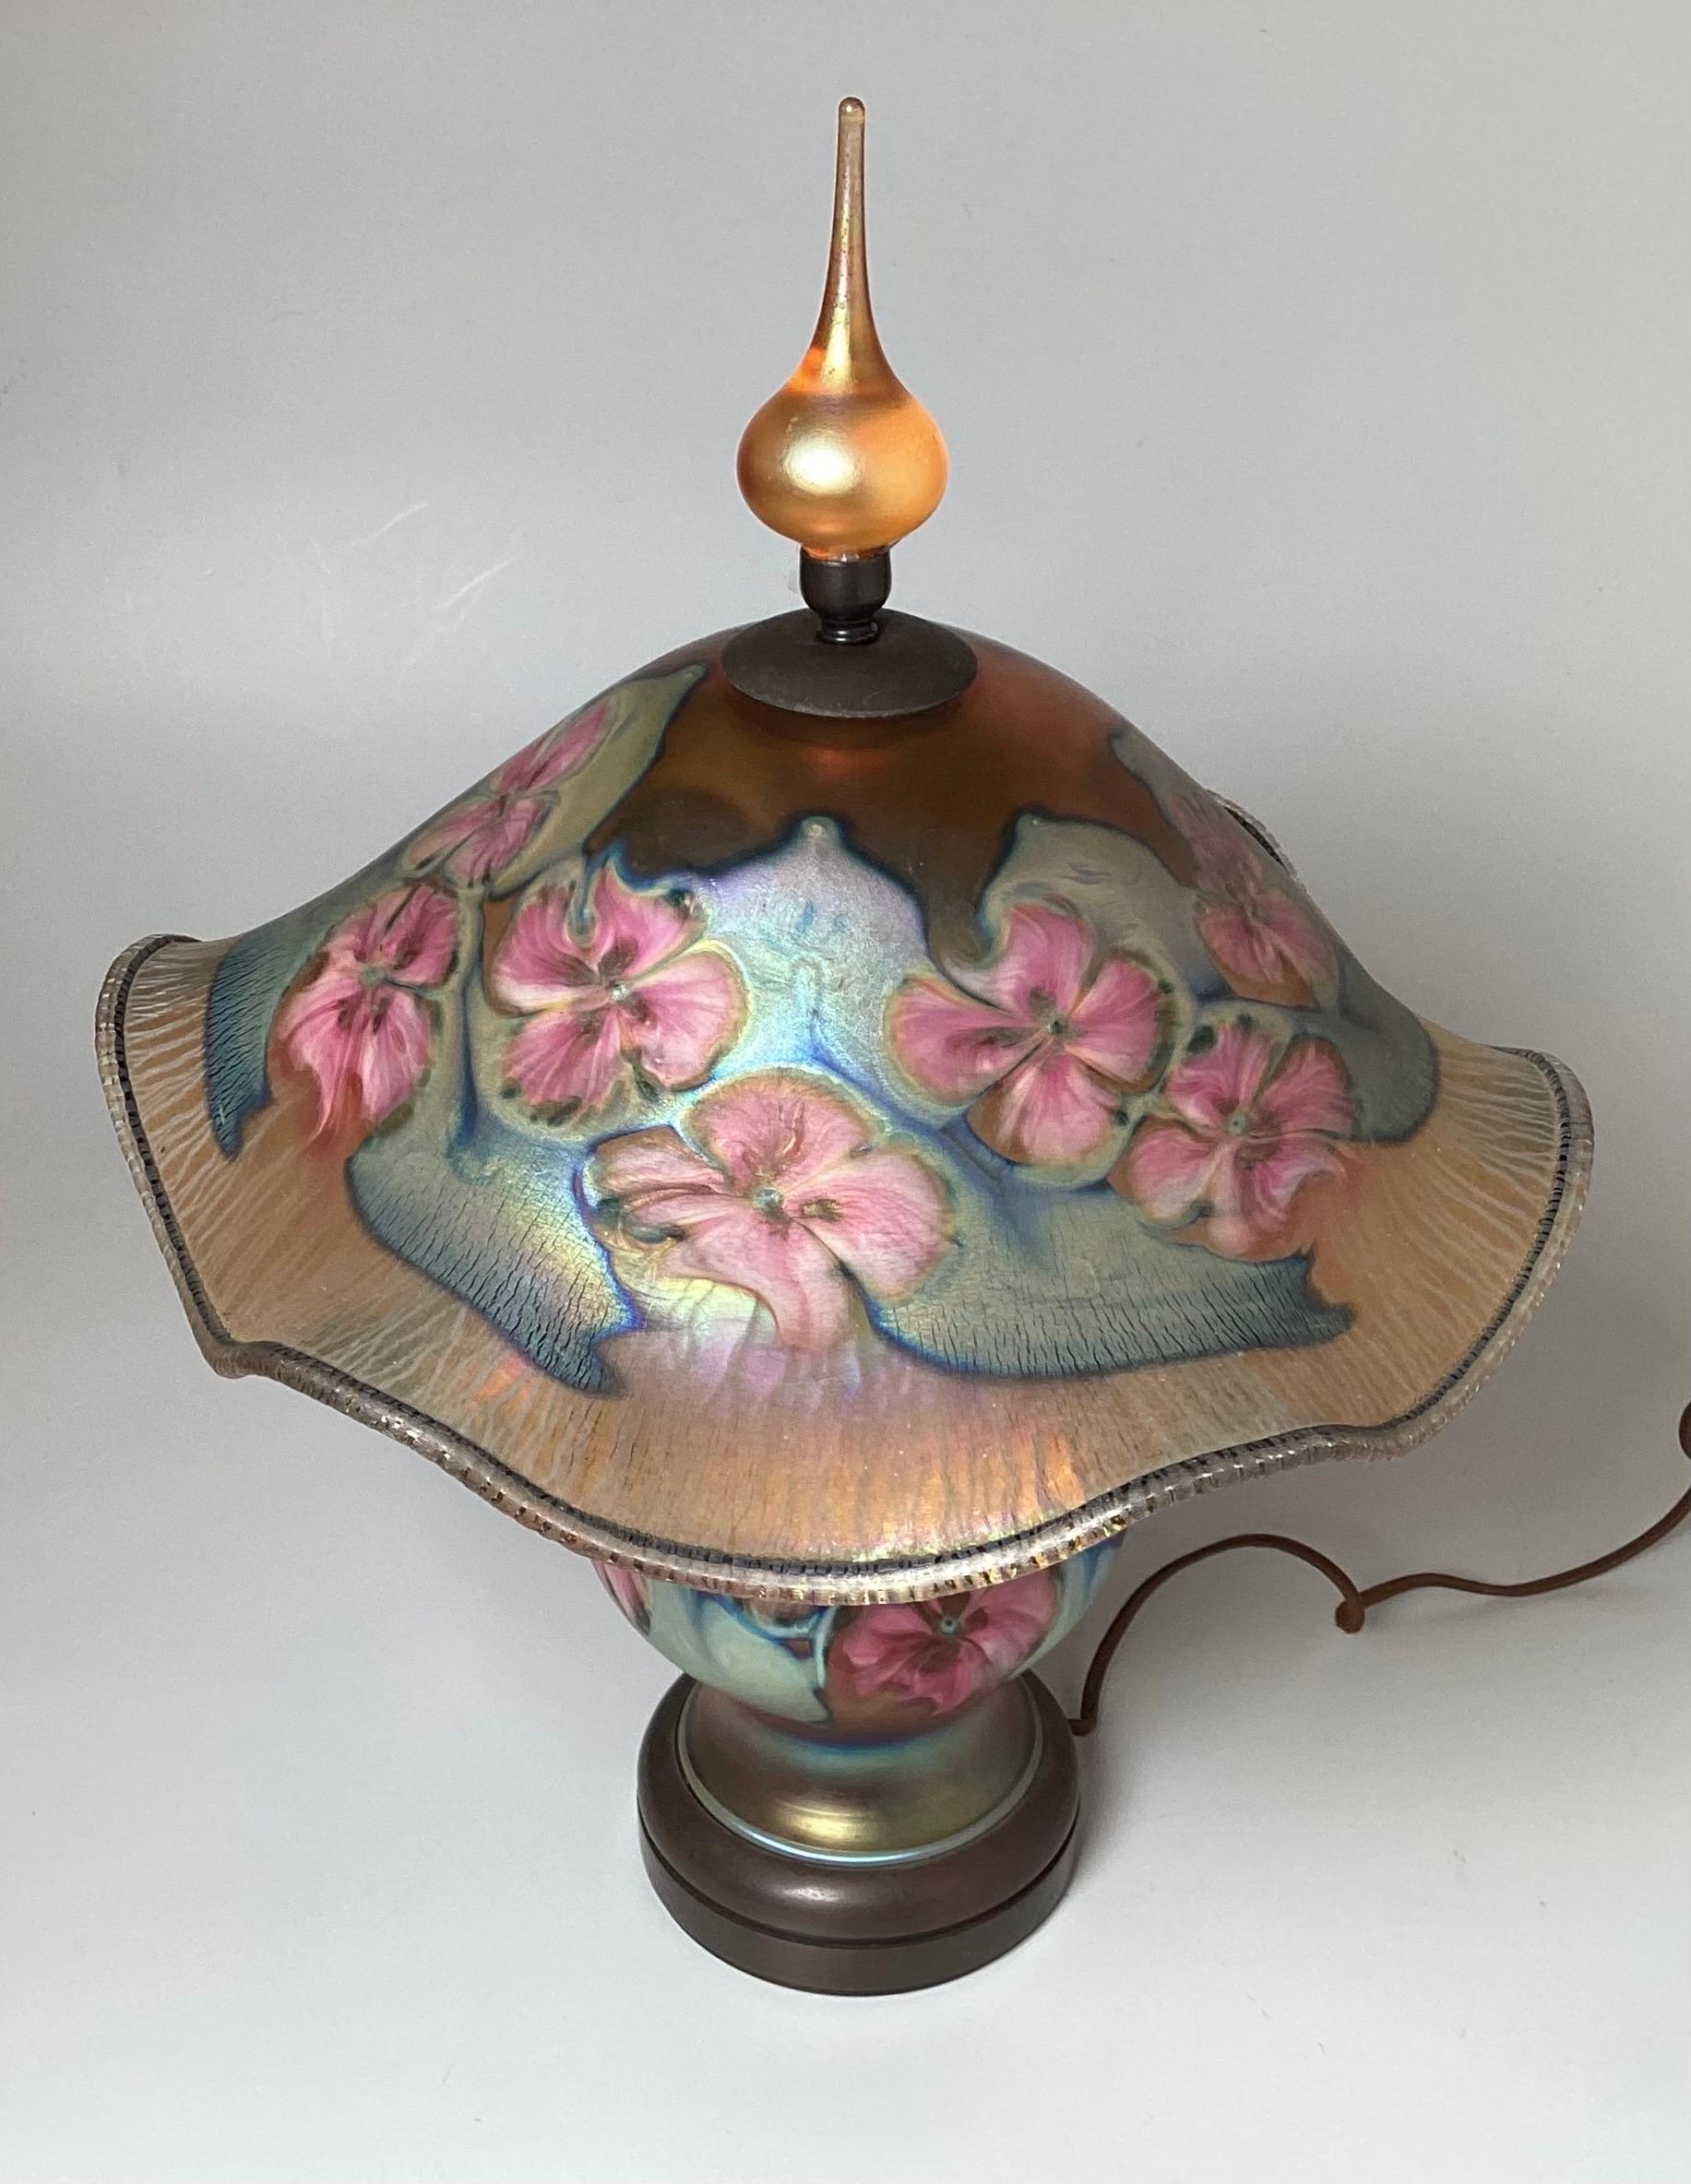 A beautiful hand made art glass lamp with gold iridescent ground and border with blue base, multi floral design and original finial. Signed Charles Lotton 1993 at top of shade 

Charles Lotton was born in a little town in Southern Illinois, after